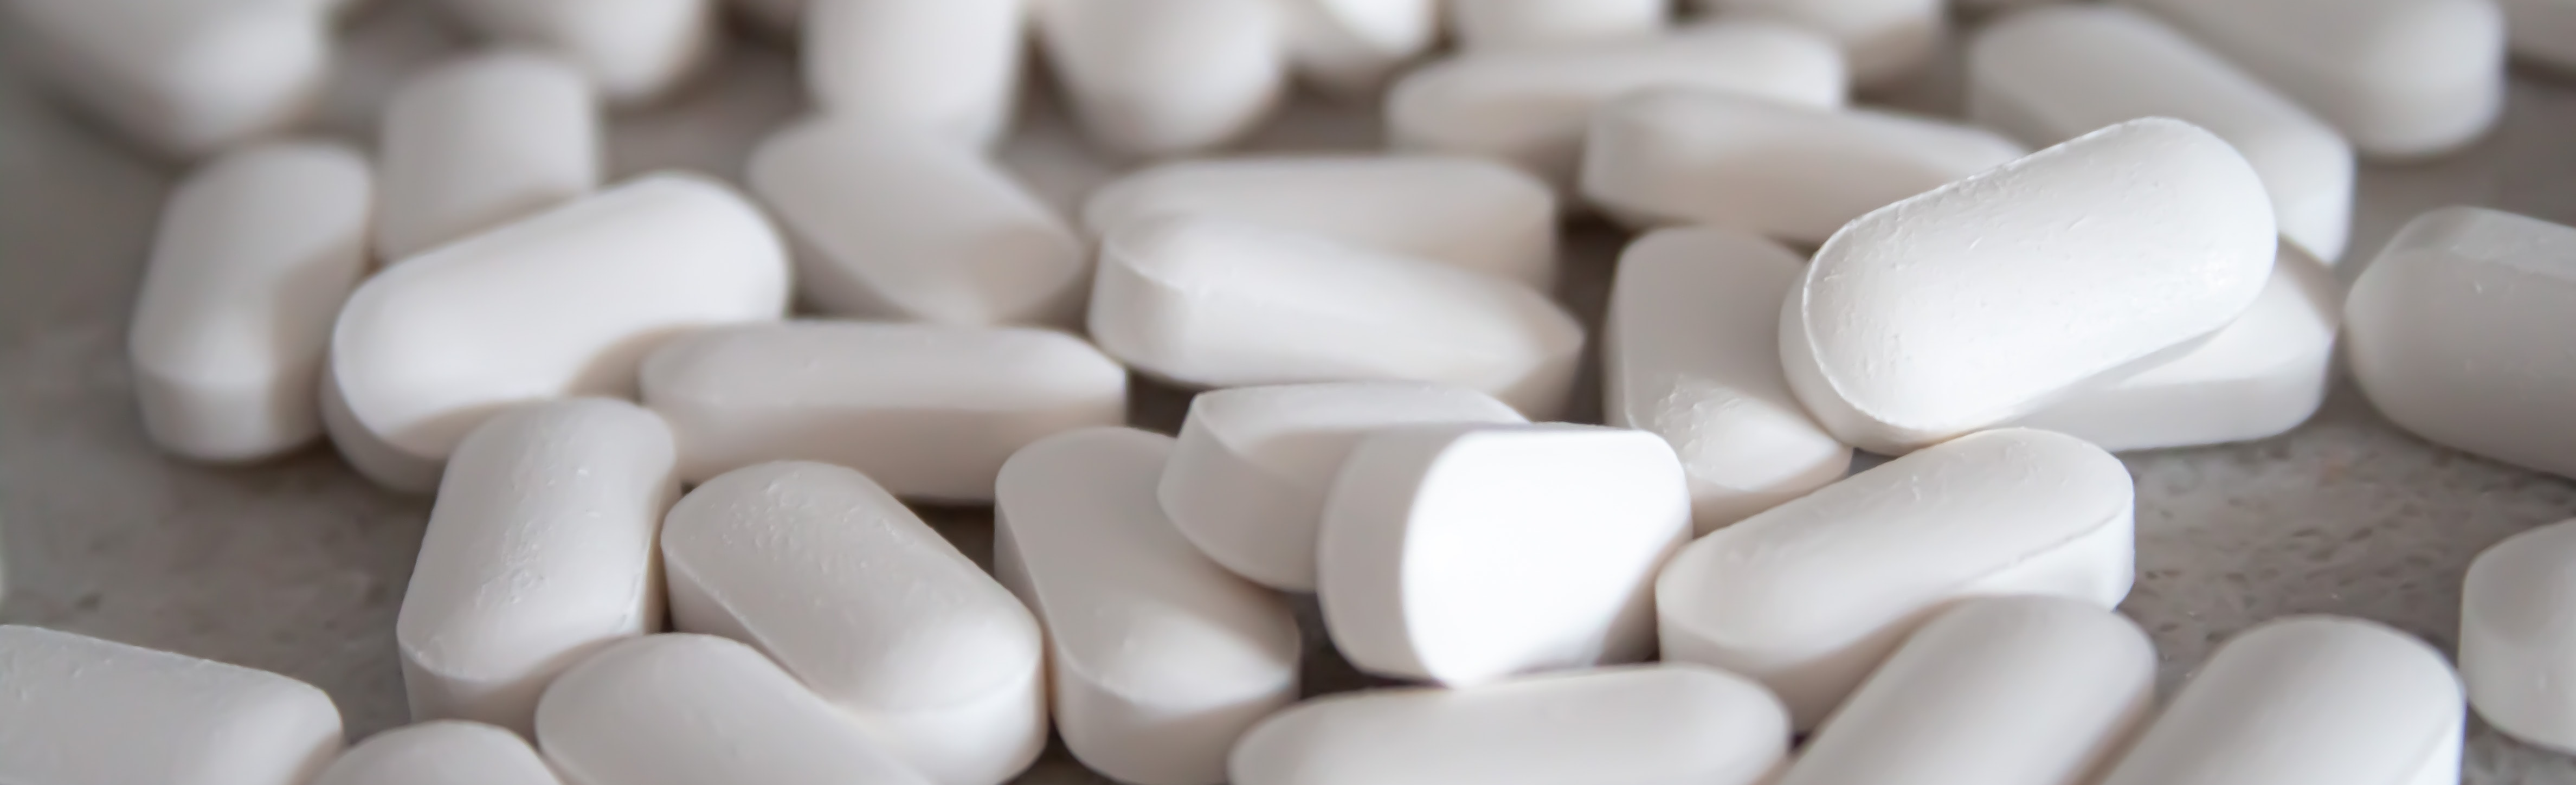 Scatter of White Pills | CU Department of Surgery | Matthew Iorio, MD